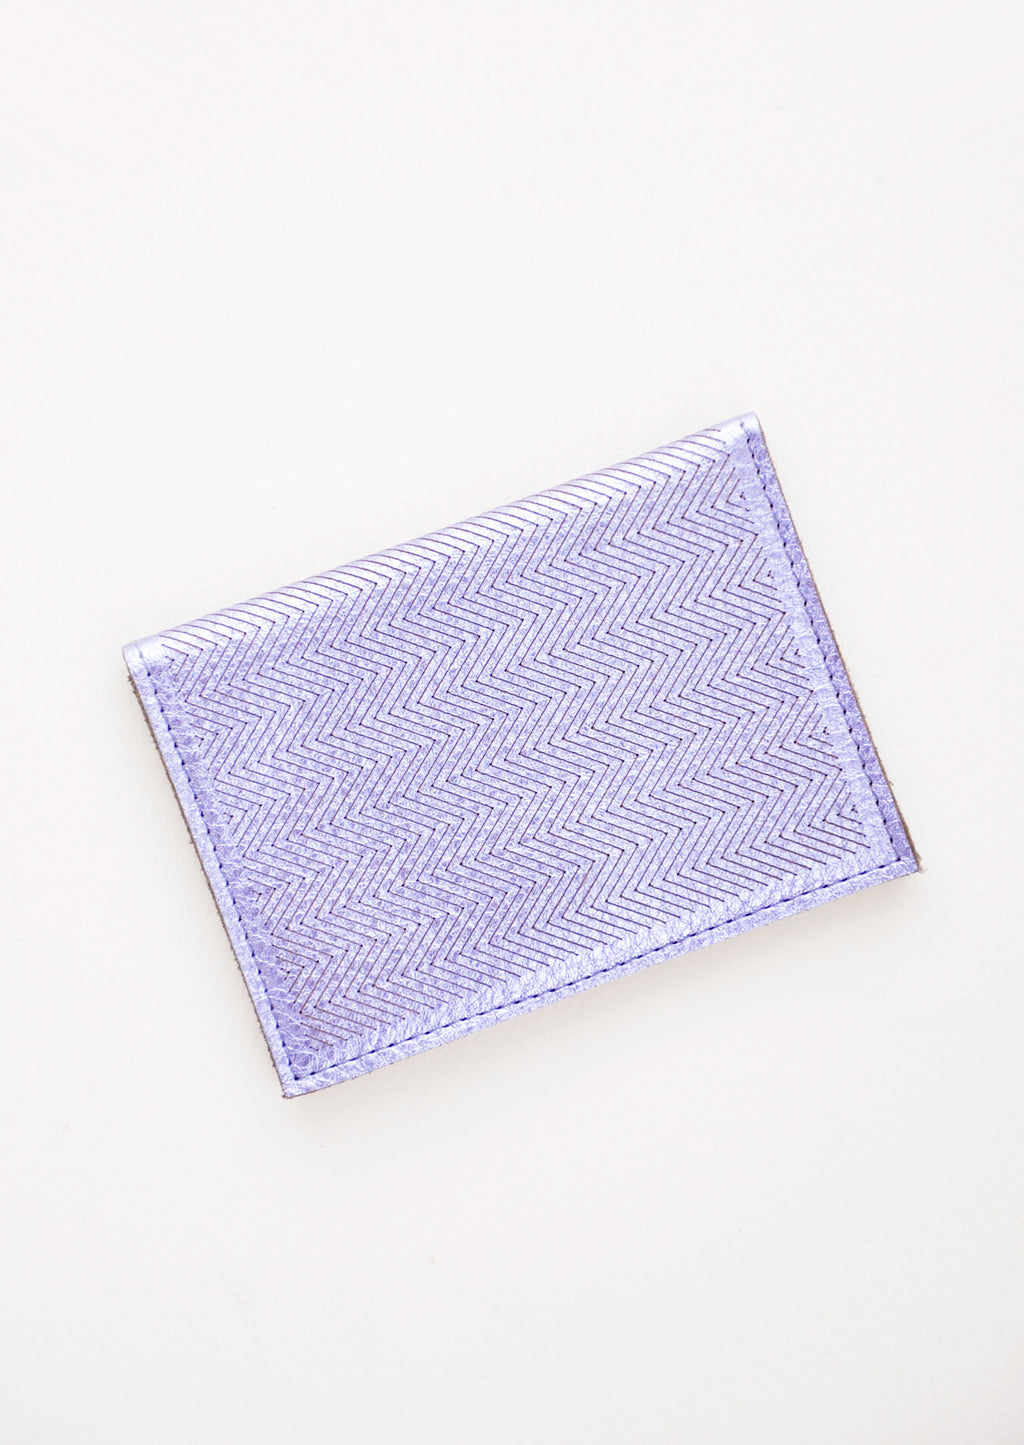 Metallic Periwinkle: Slim metallic blue leather wallet with two interior slip pockets that folds closed with a snap, shown closed with zig zag etched pattern. 